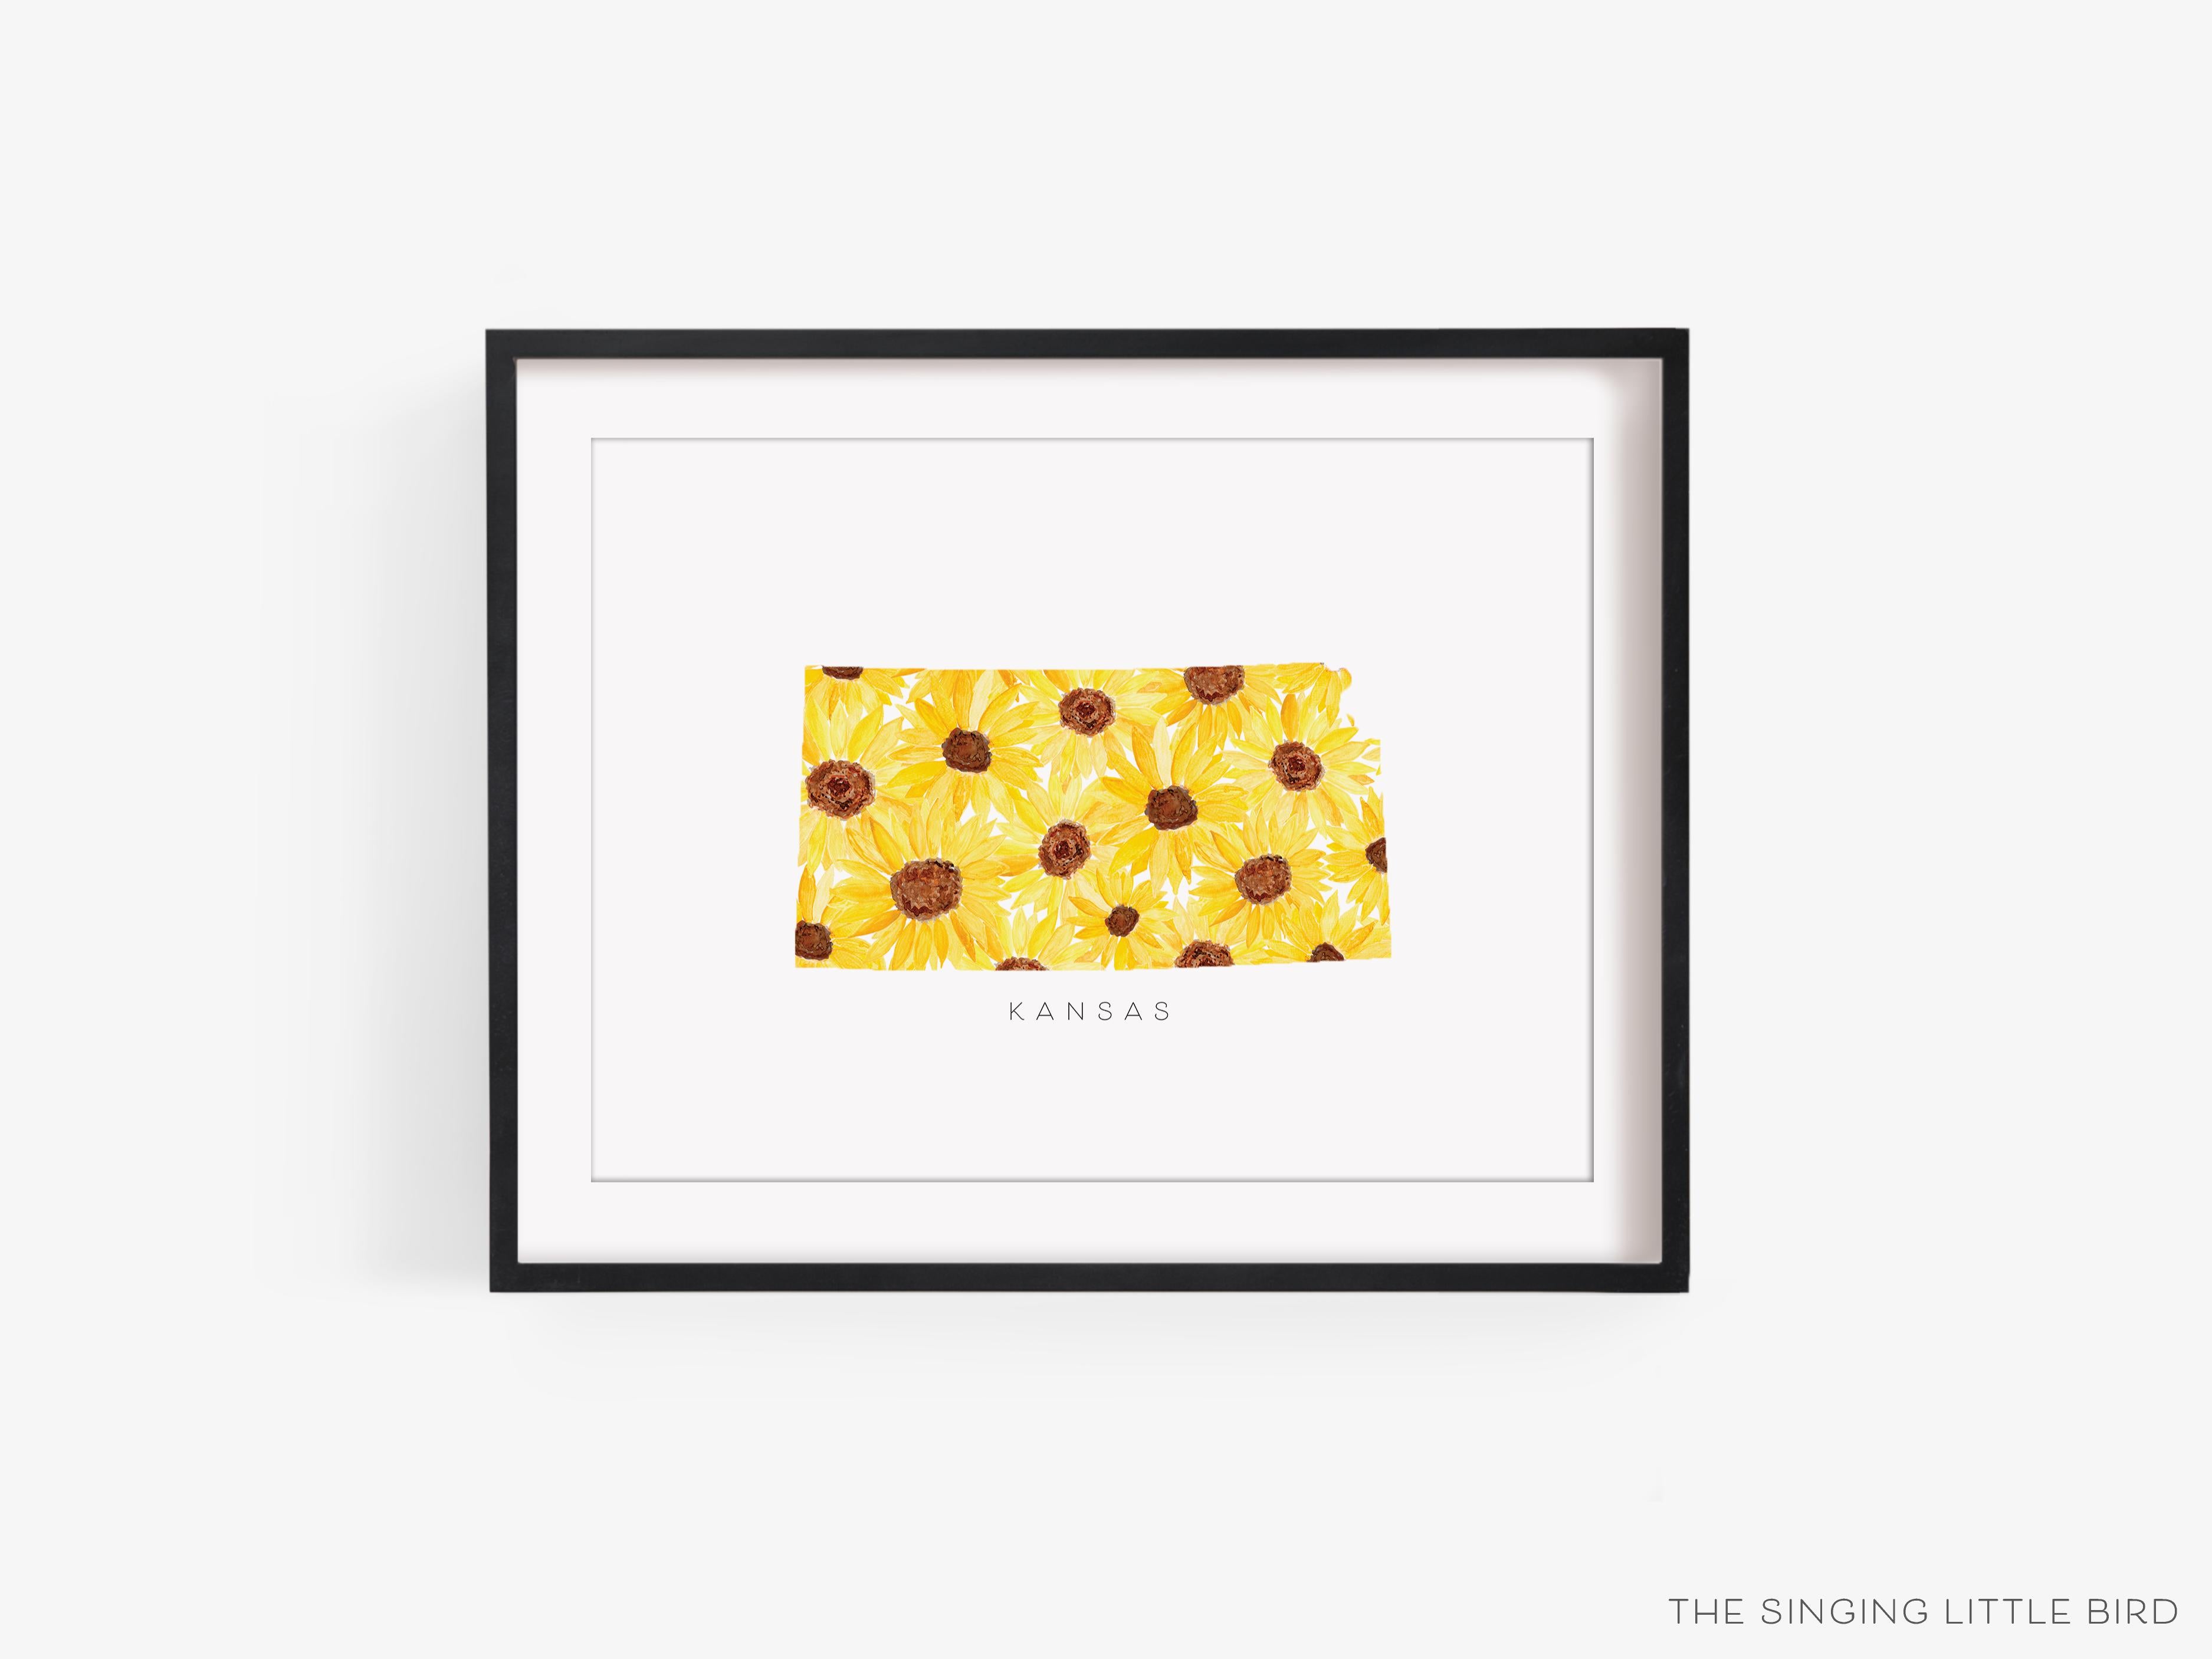 Kansas Sunflower Art Print-This watercolor art print features our hand-painted sunflowers, printed in the USA on 120lb high quality art paper. This makes a great gift or wall decor for the Kansas state flower lover in your life.-The Singing Little Bird